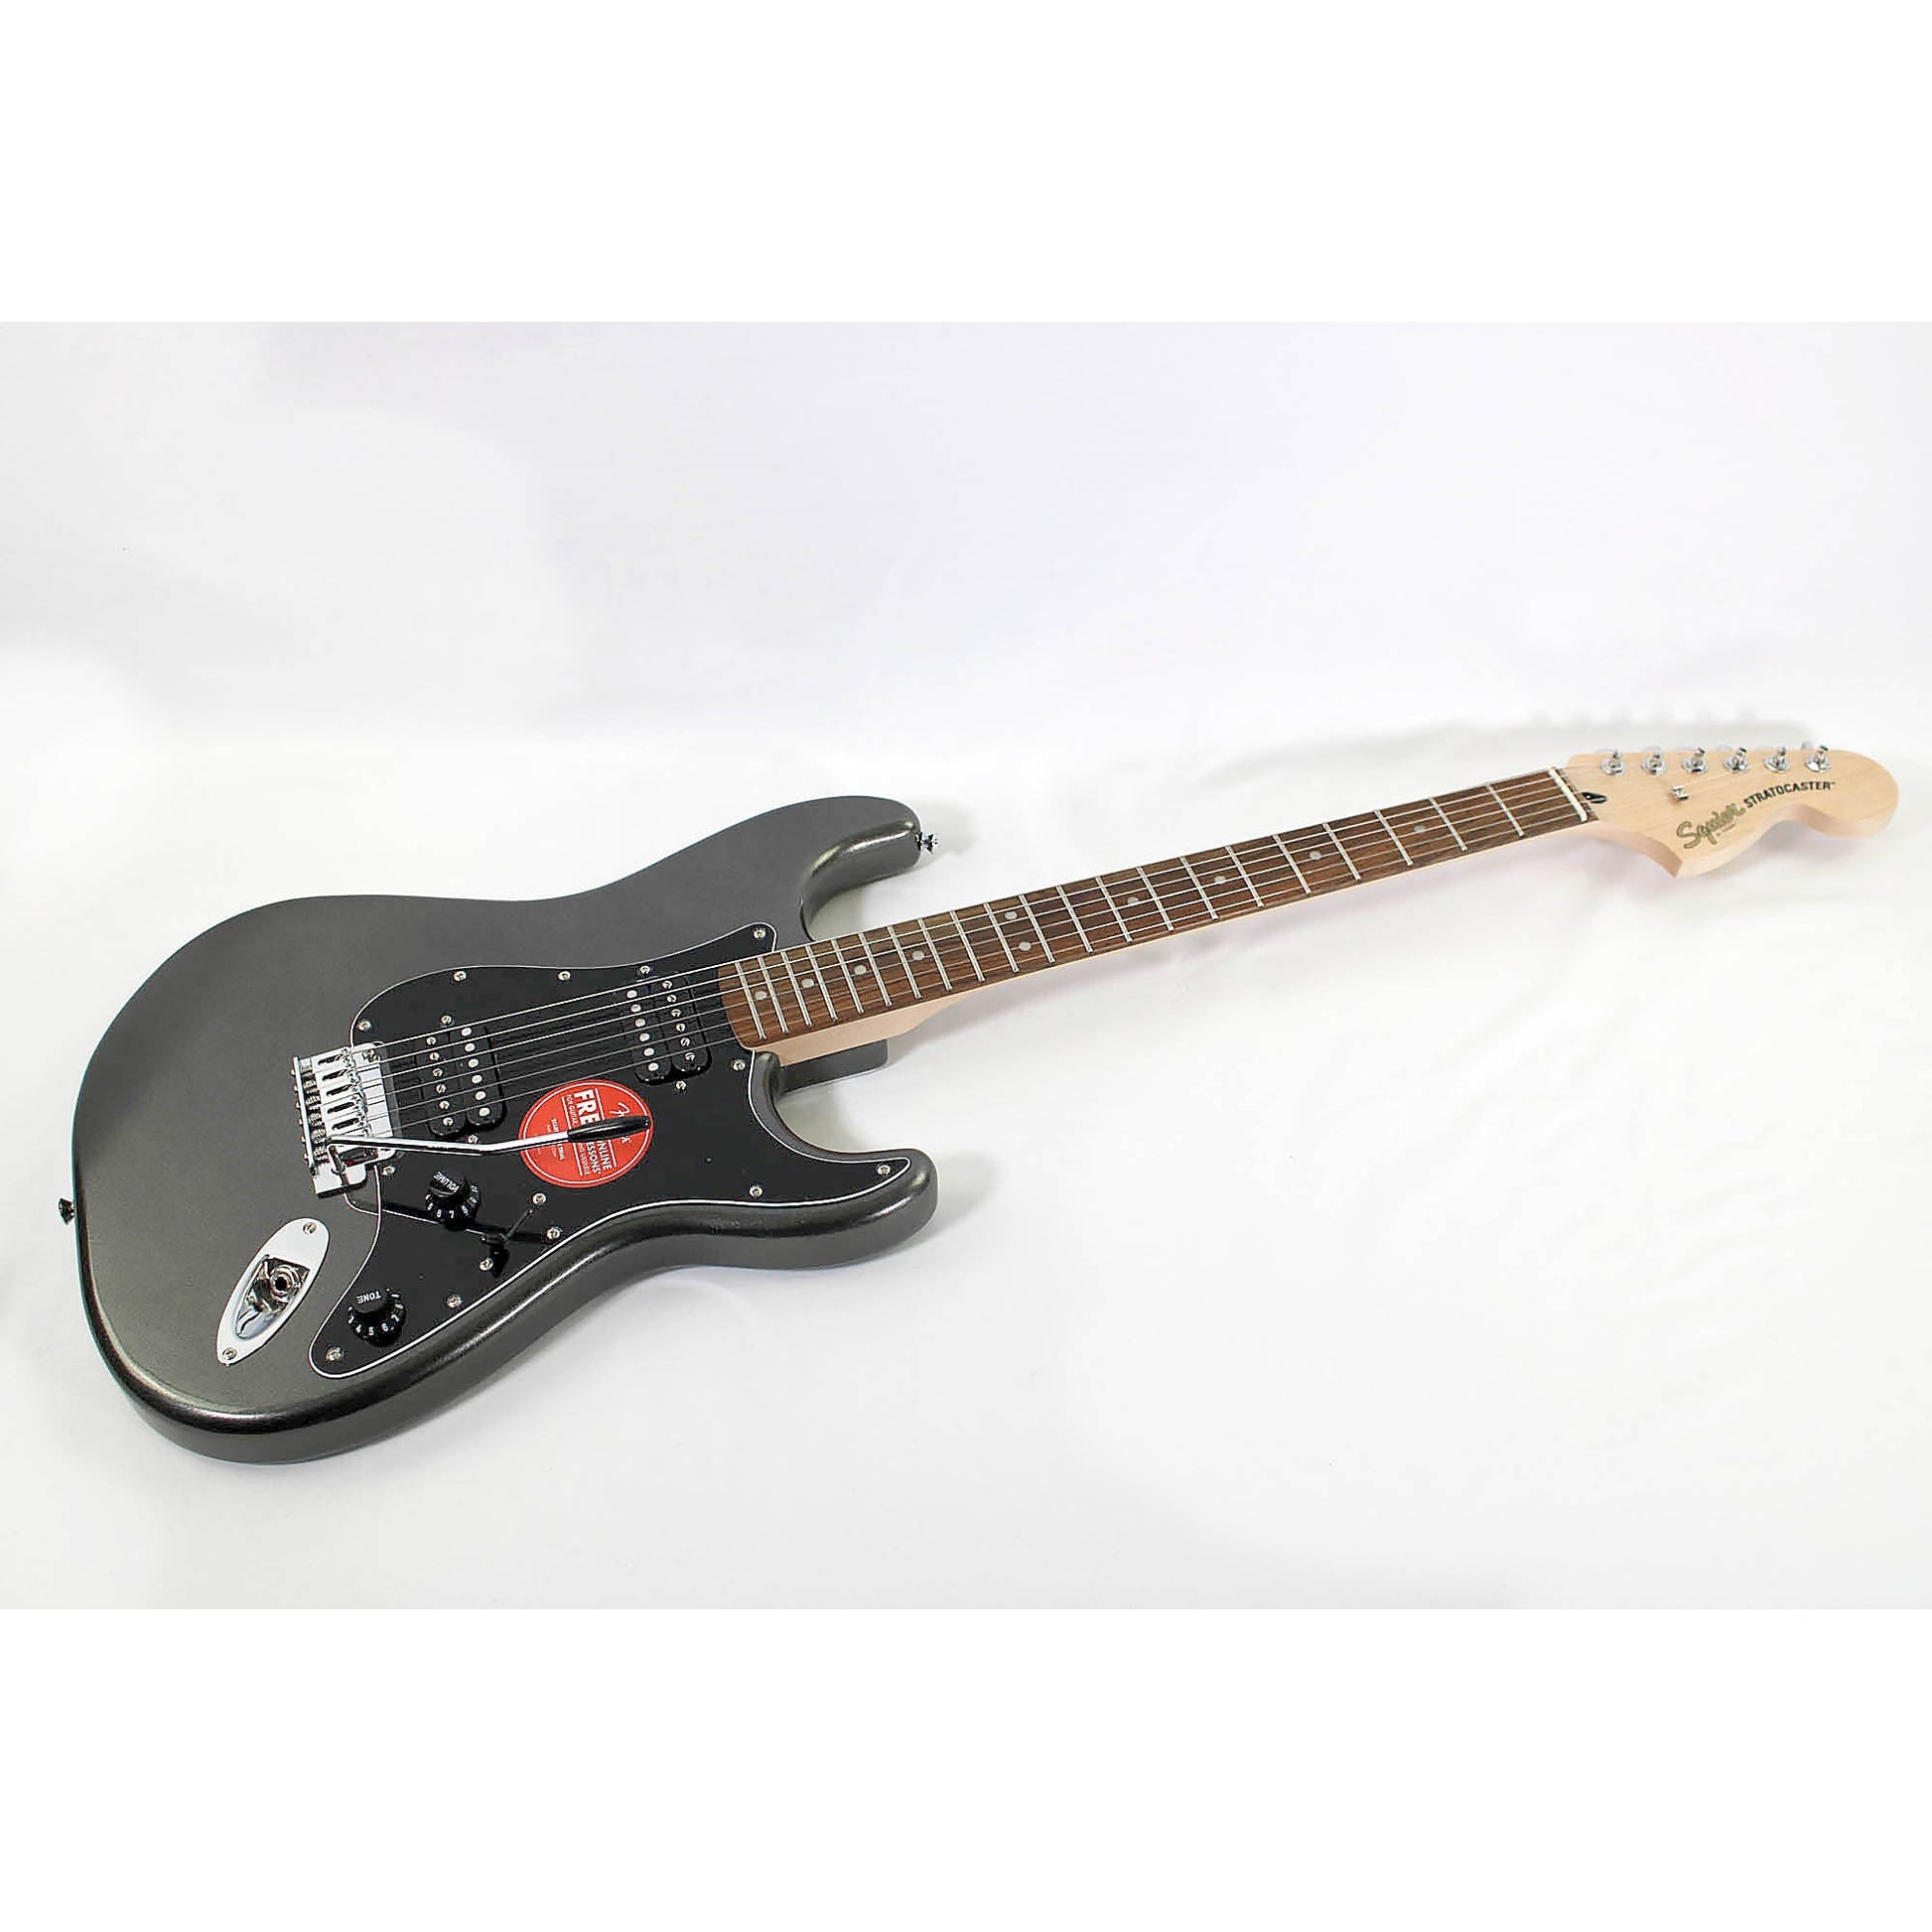 Squier Affinity Series Stratocaster - Charcoal Frost Metallic - Leitz Music-885978723409-0378051569